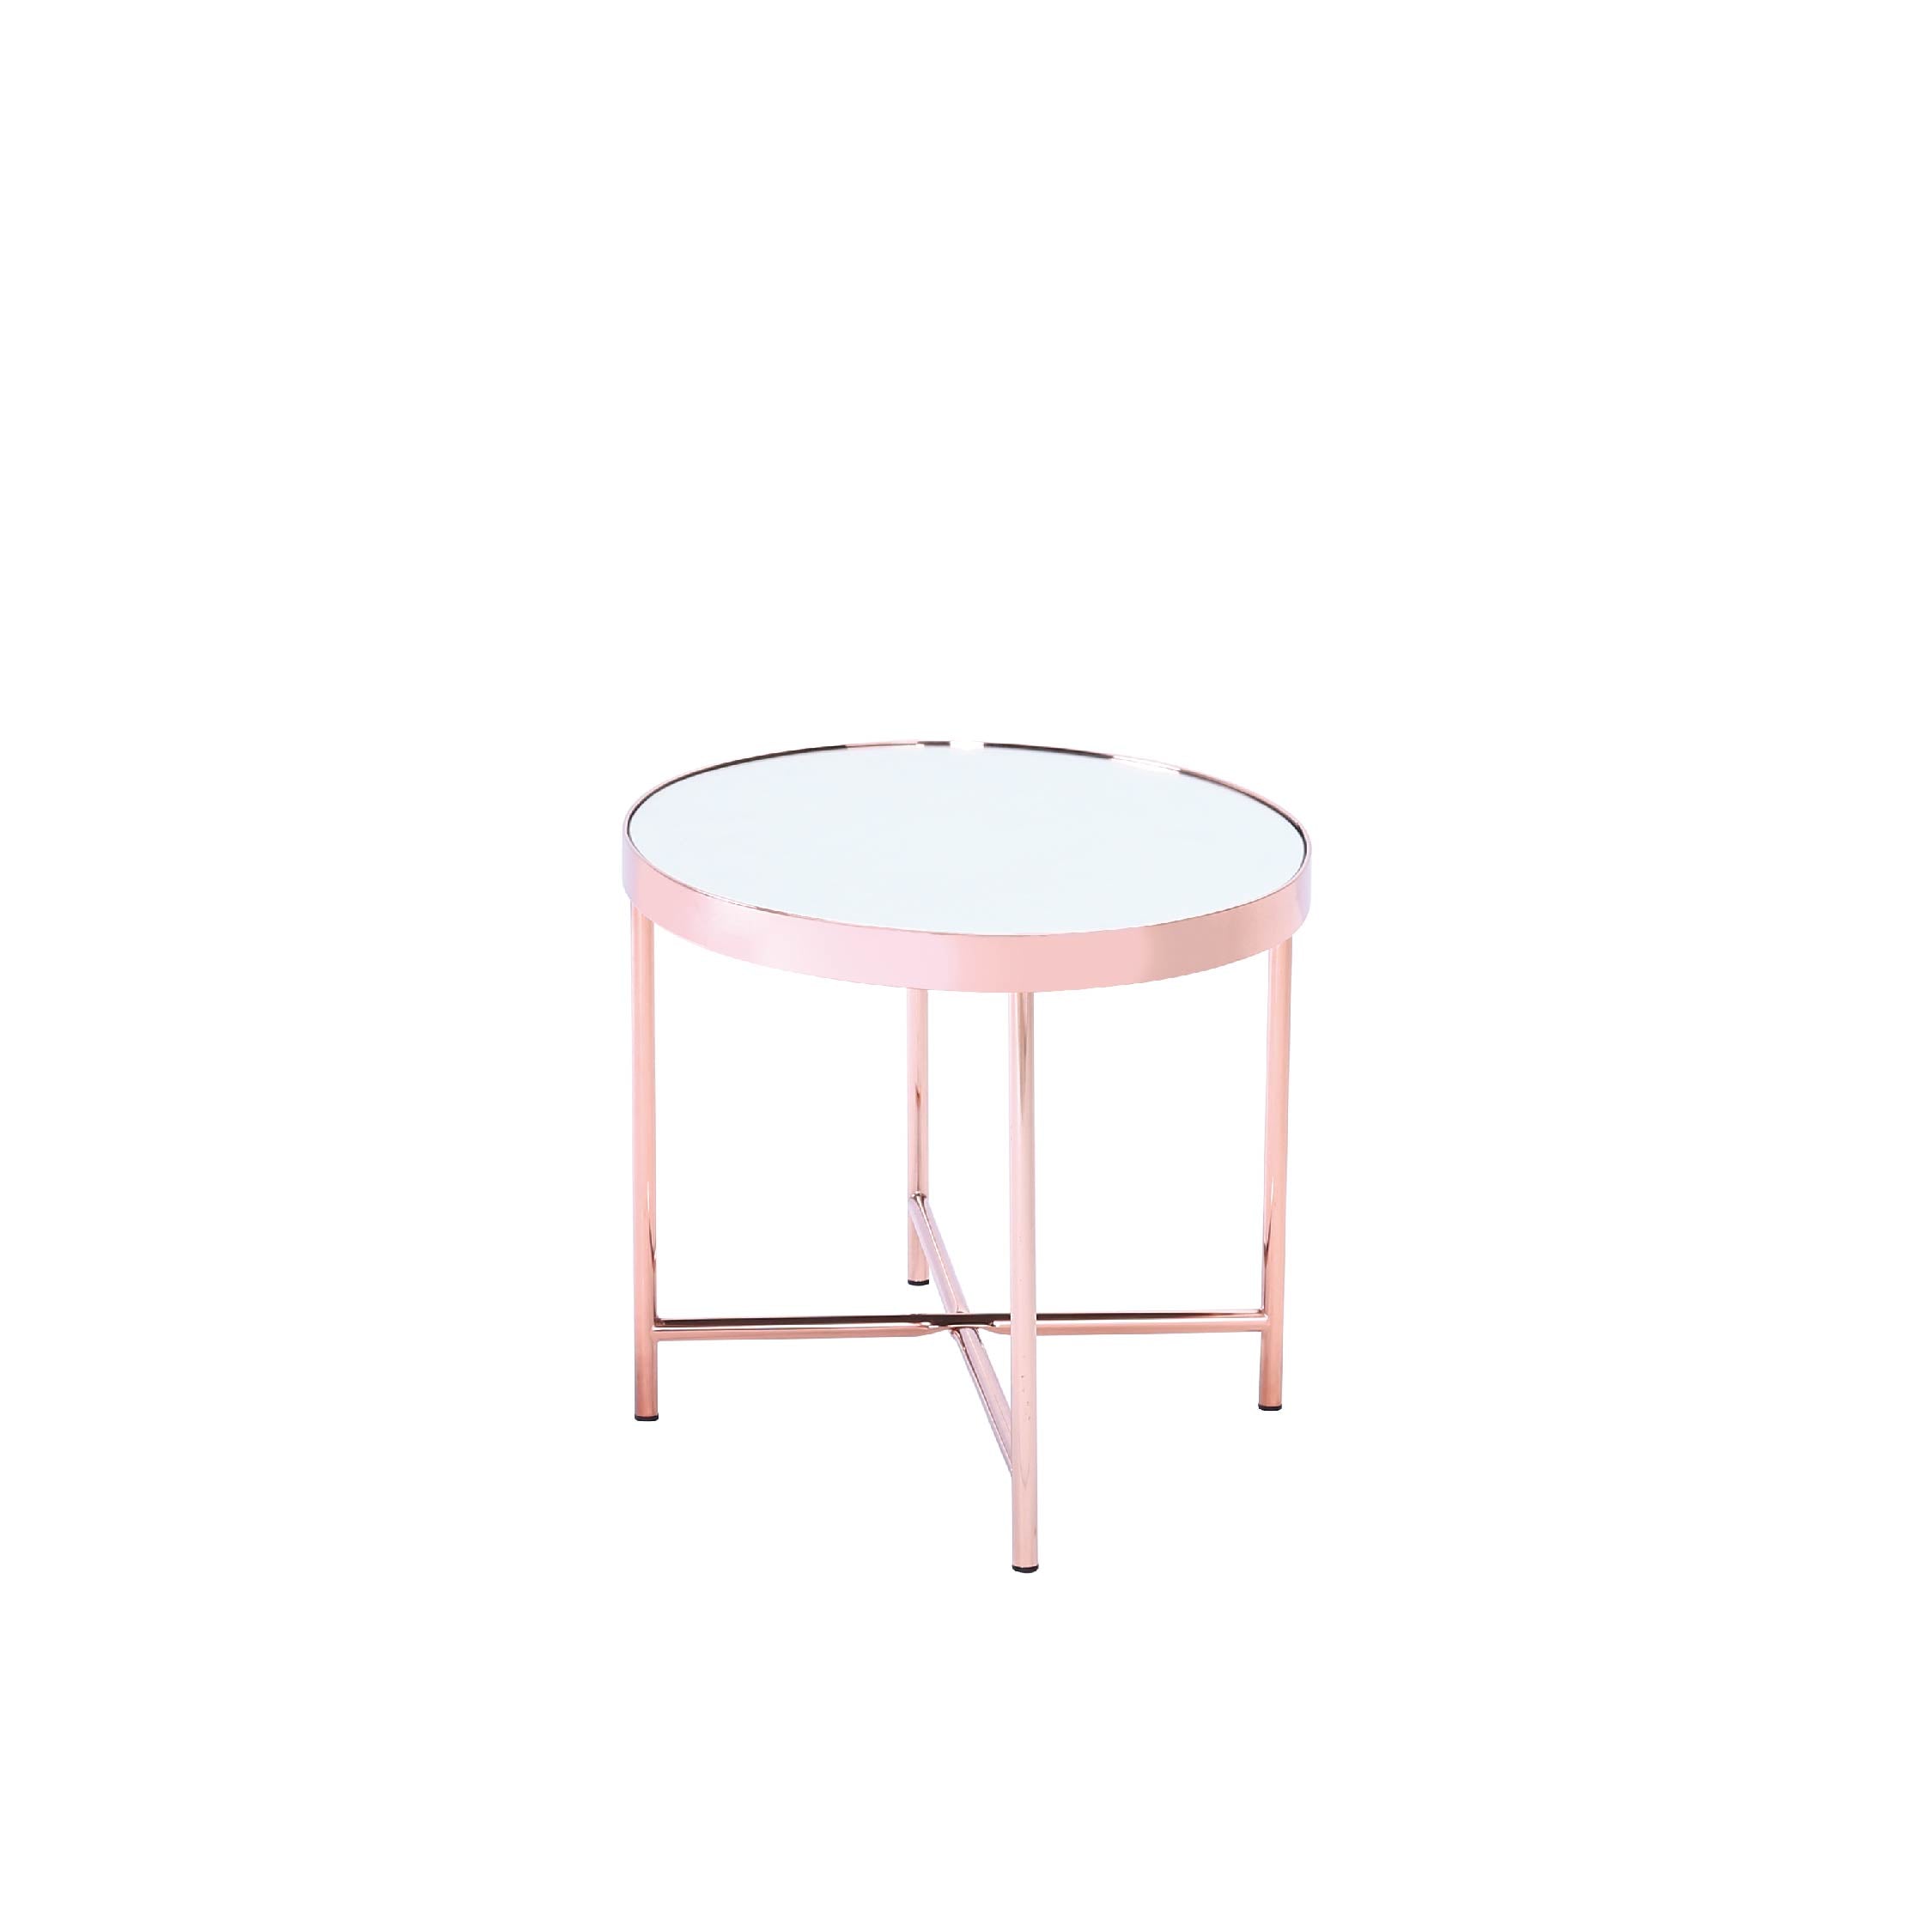 DULCET Oval Coffee Table